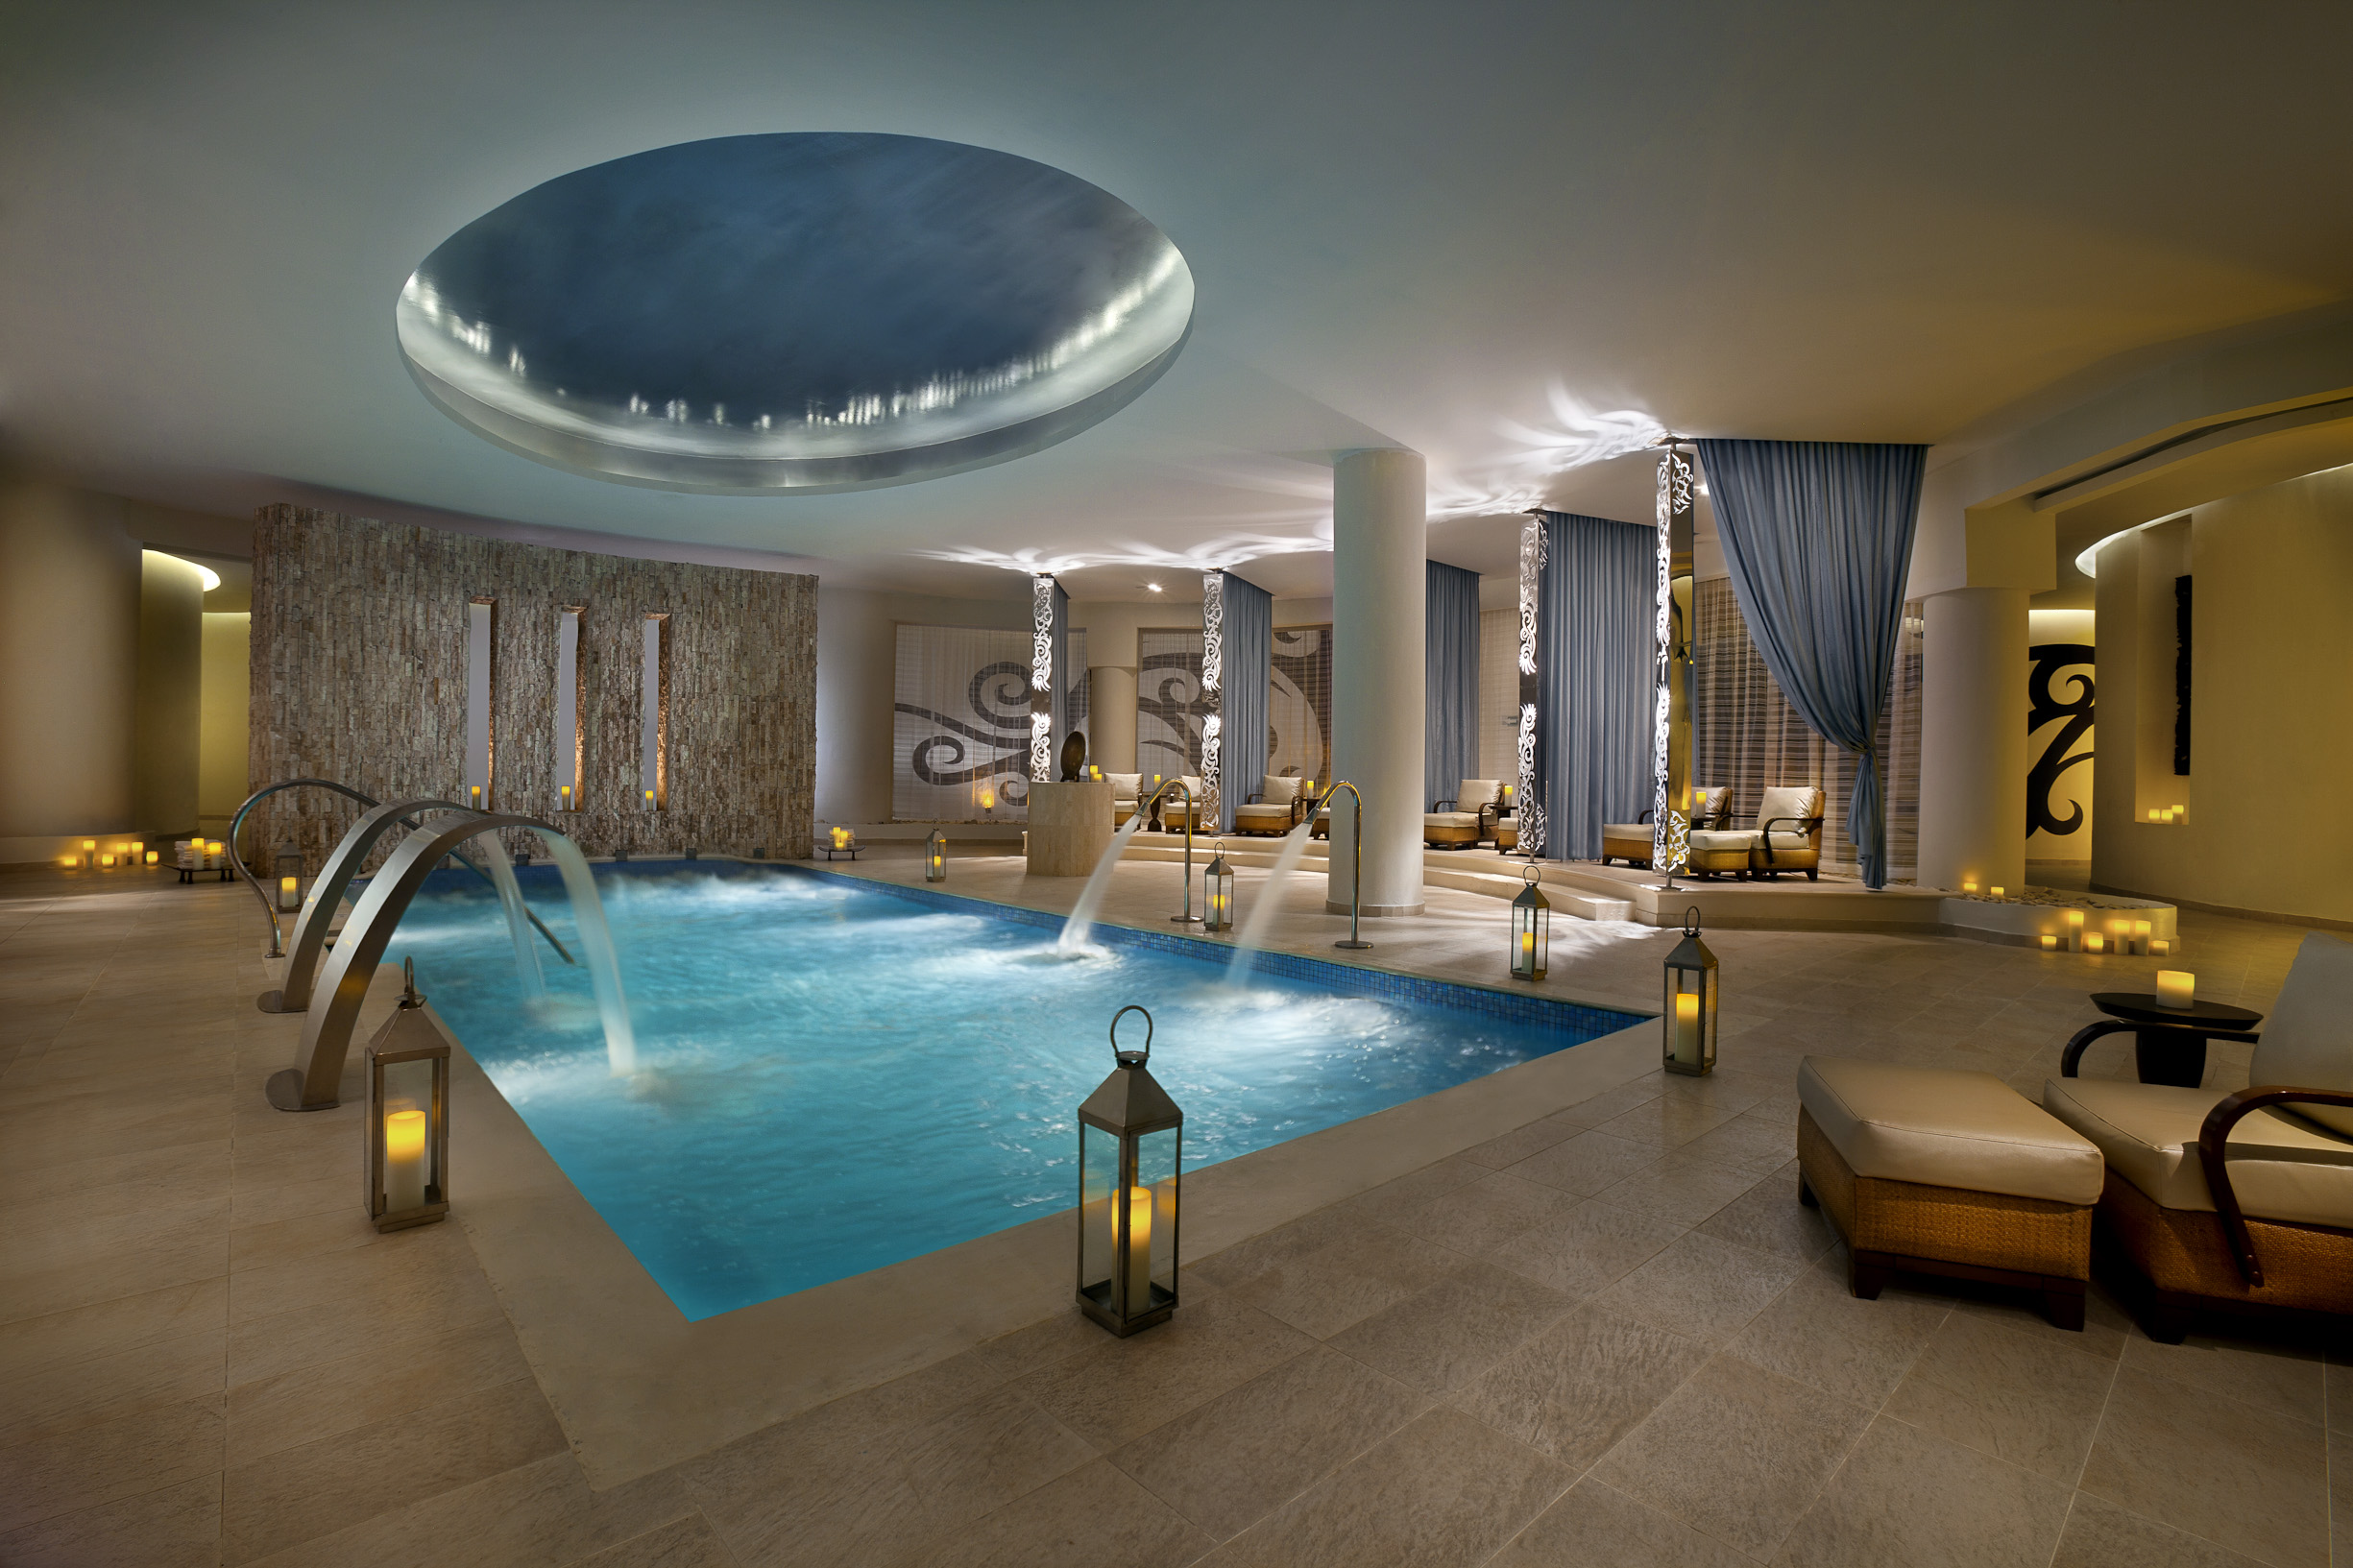 The Rock Spa at The Hard Rock Hotel and Casino, Punta Cana, Dominican Republic